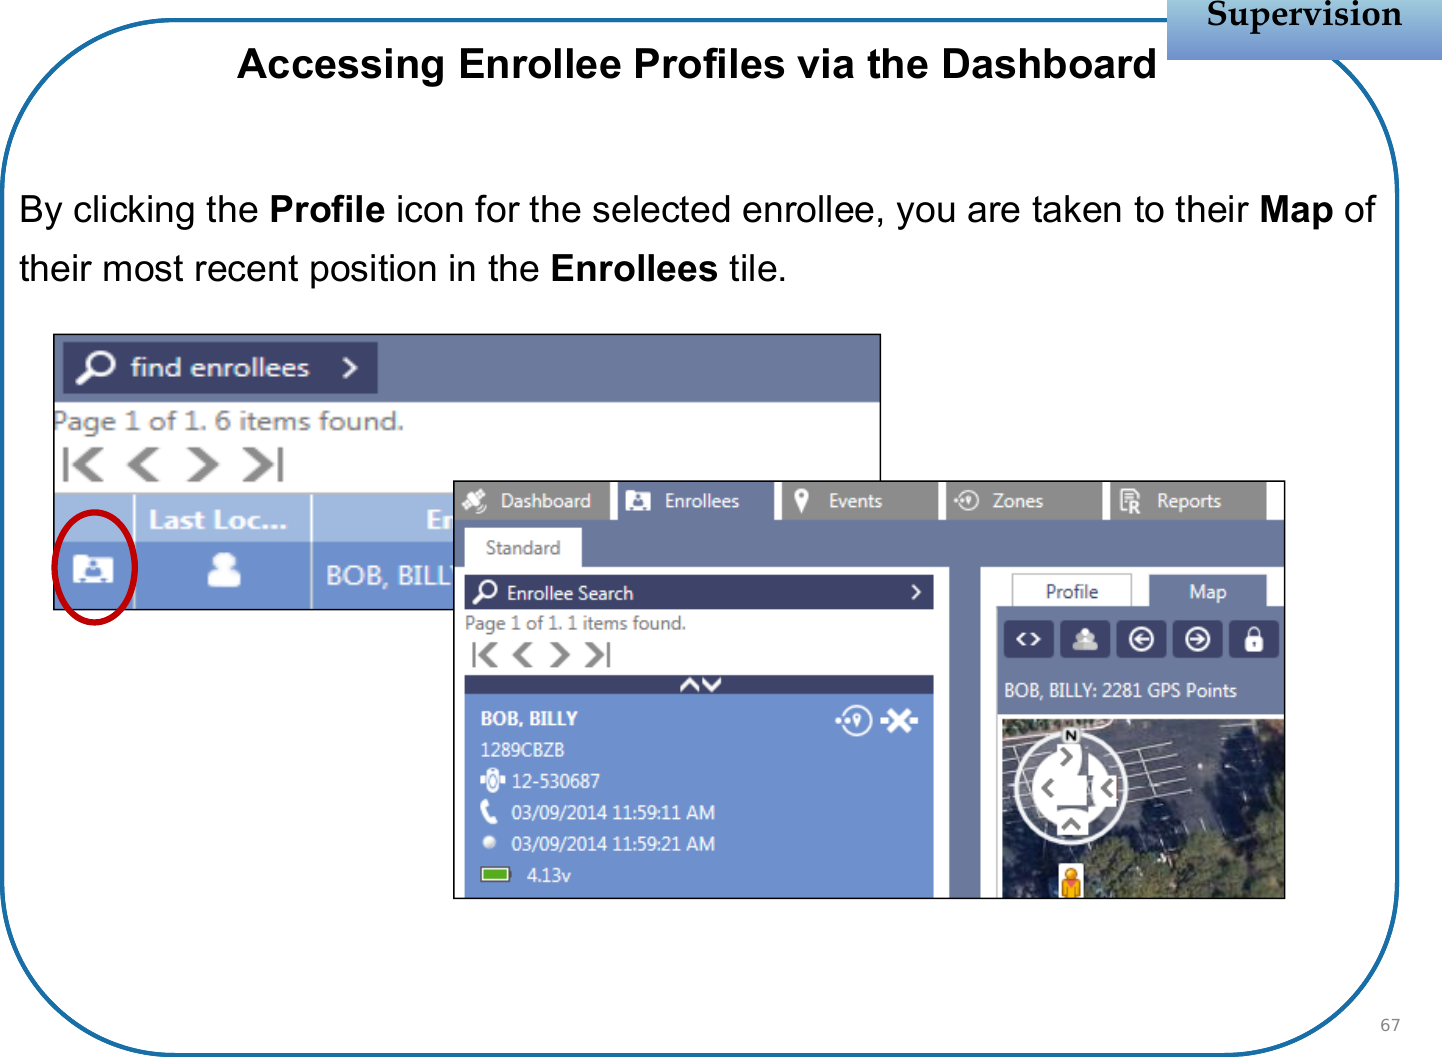 Accessing Enrollee Profiles via the DashboardBy clicking the Profile icon for the selected enrollee, you are taken to their Map of their most recent position in the Enrollees tile.SupervisionSupervision67